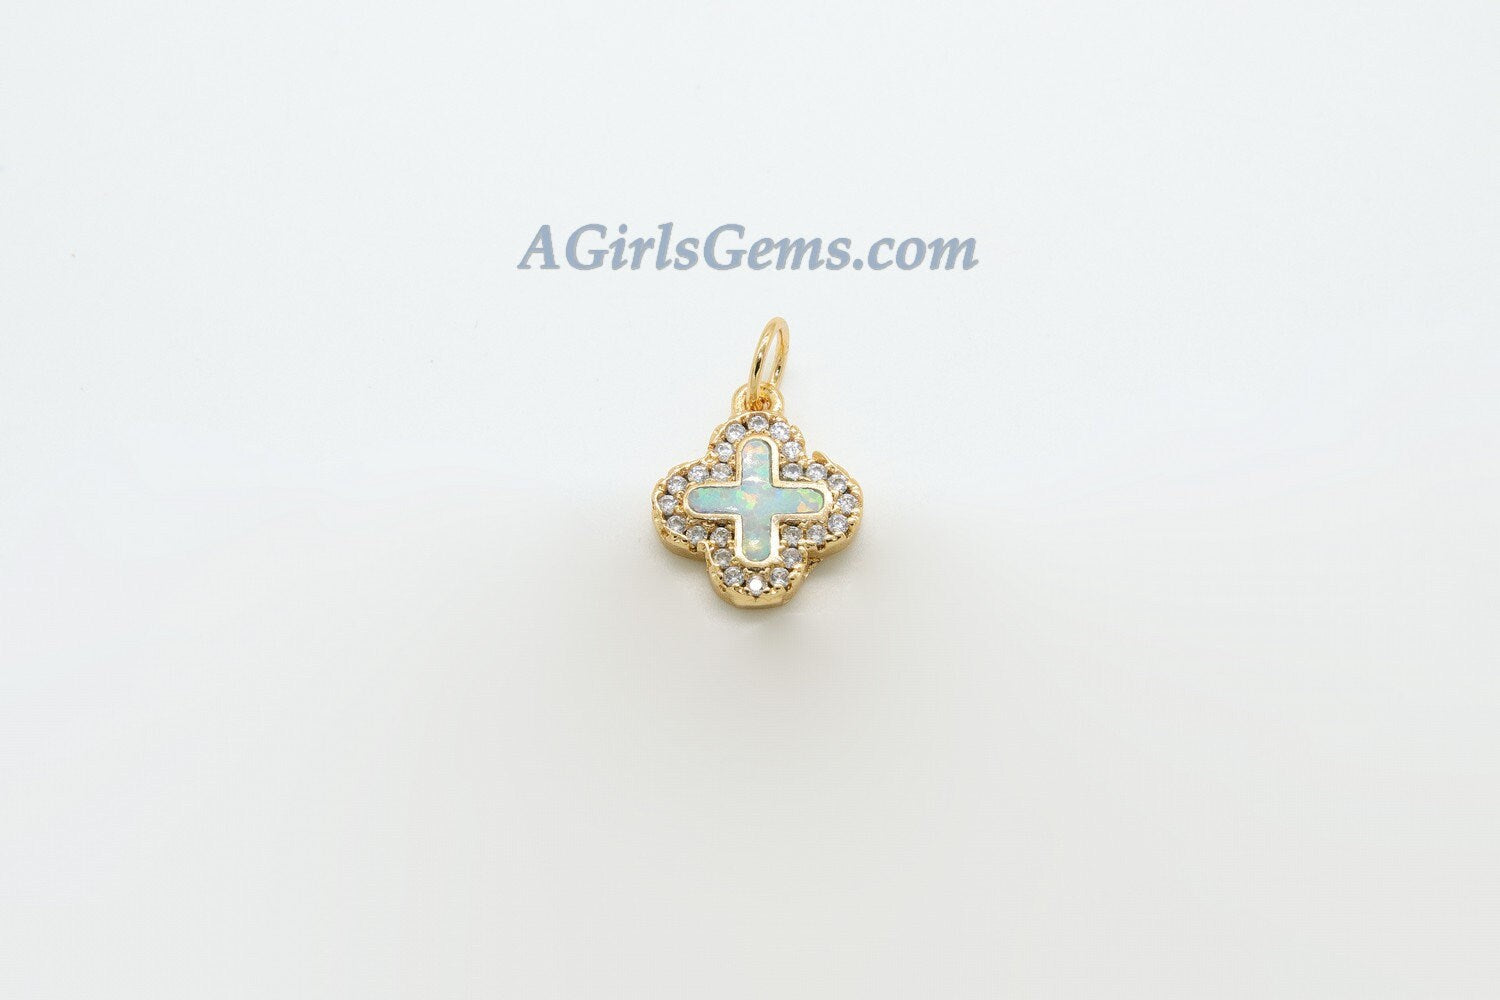 Cross Charm, CZ Pave Gold or Silver Opal Religious Cross Pendants #418, Fire Opal Catholic Charms for Religious Necklace Jewelry Making